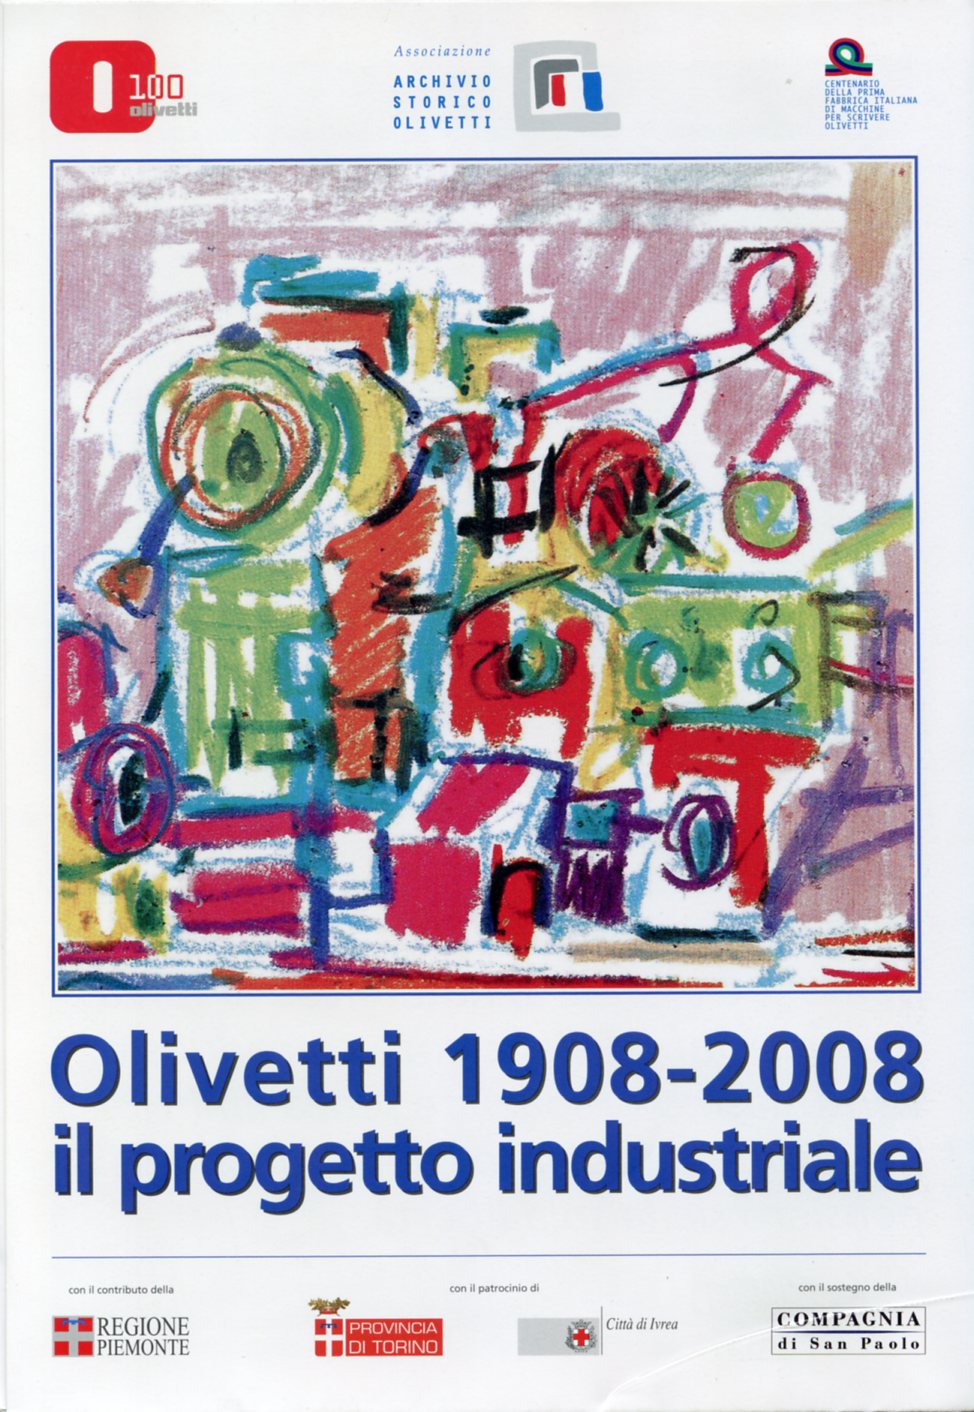 Olivetti 1908-2008 – The Industrial Project